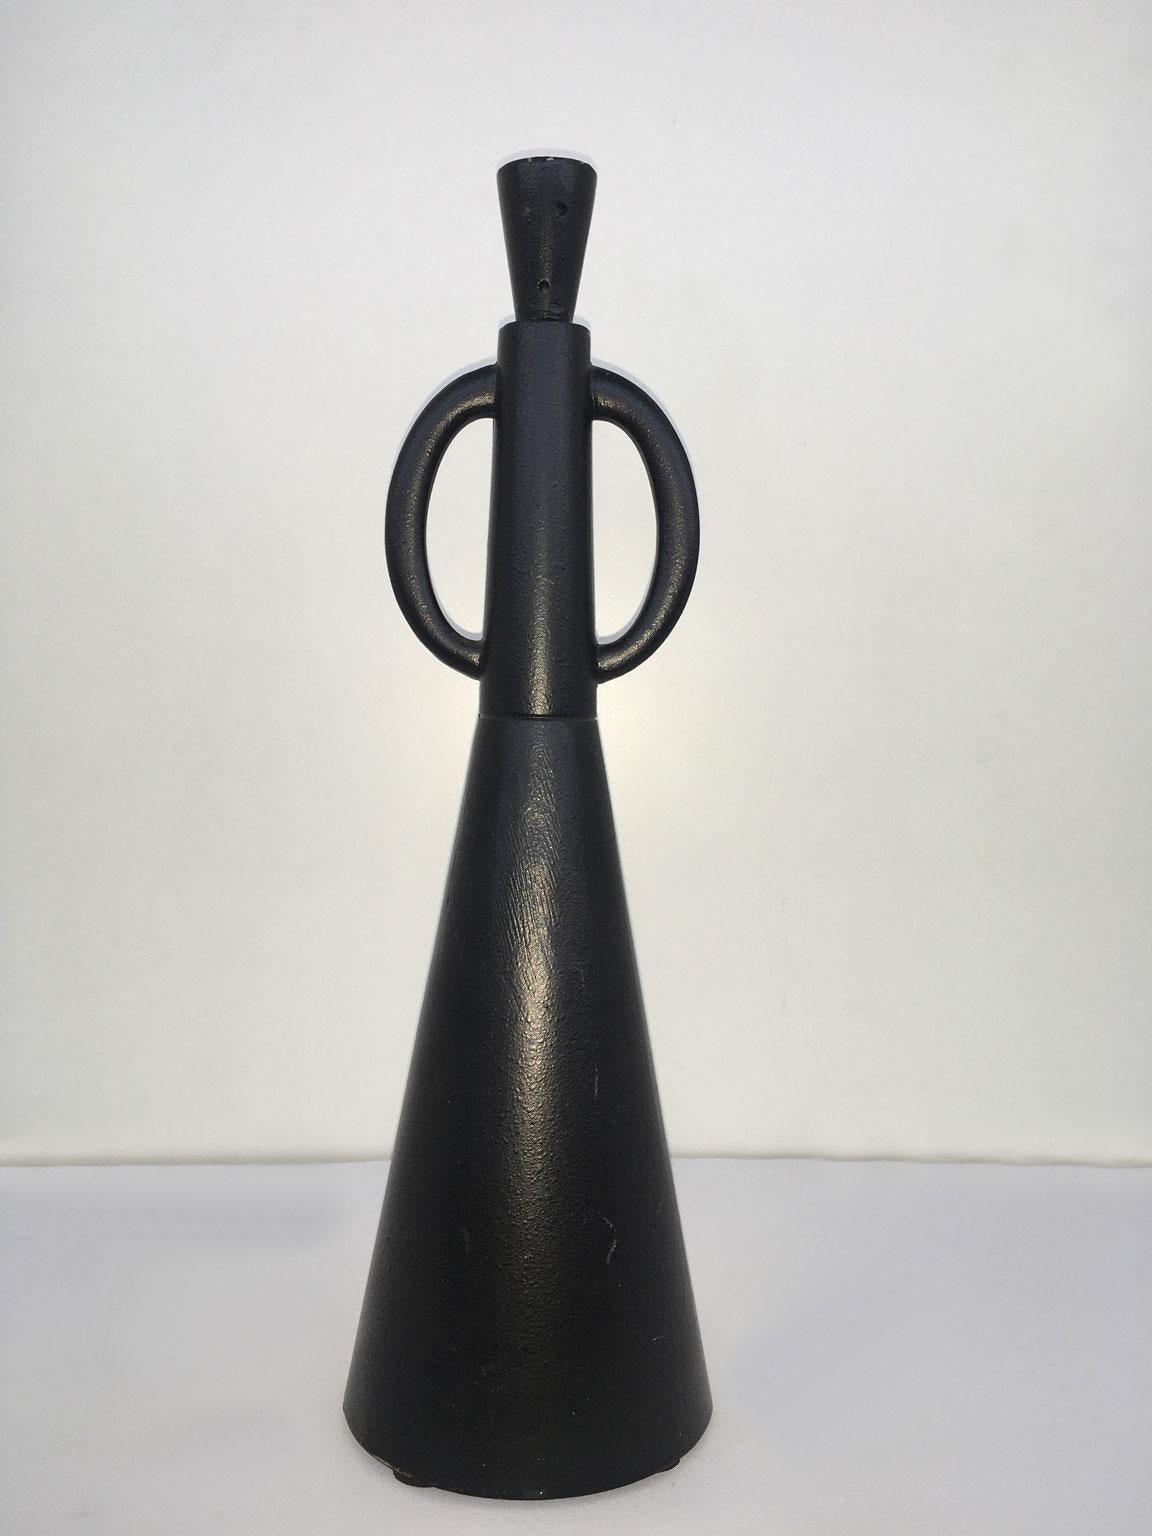 1980 Italy Post-Modern Alessandro Guerriero Abstract Sculpture Goodluck Black For Sale 3